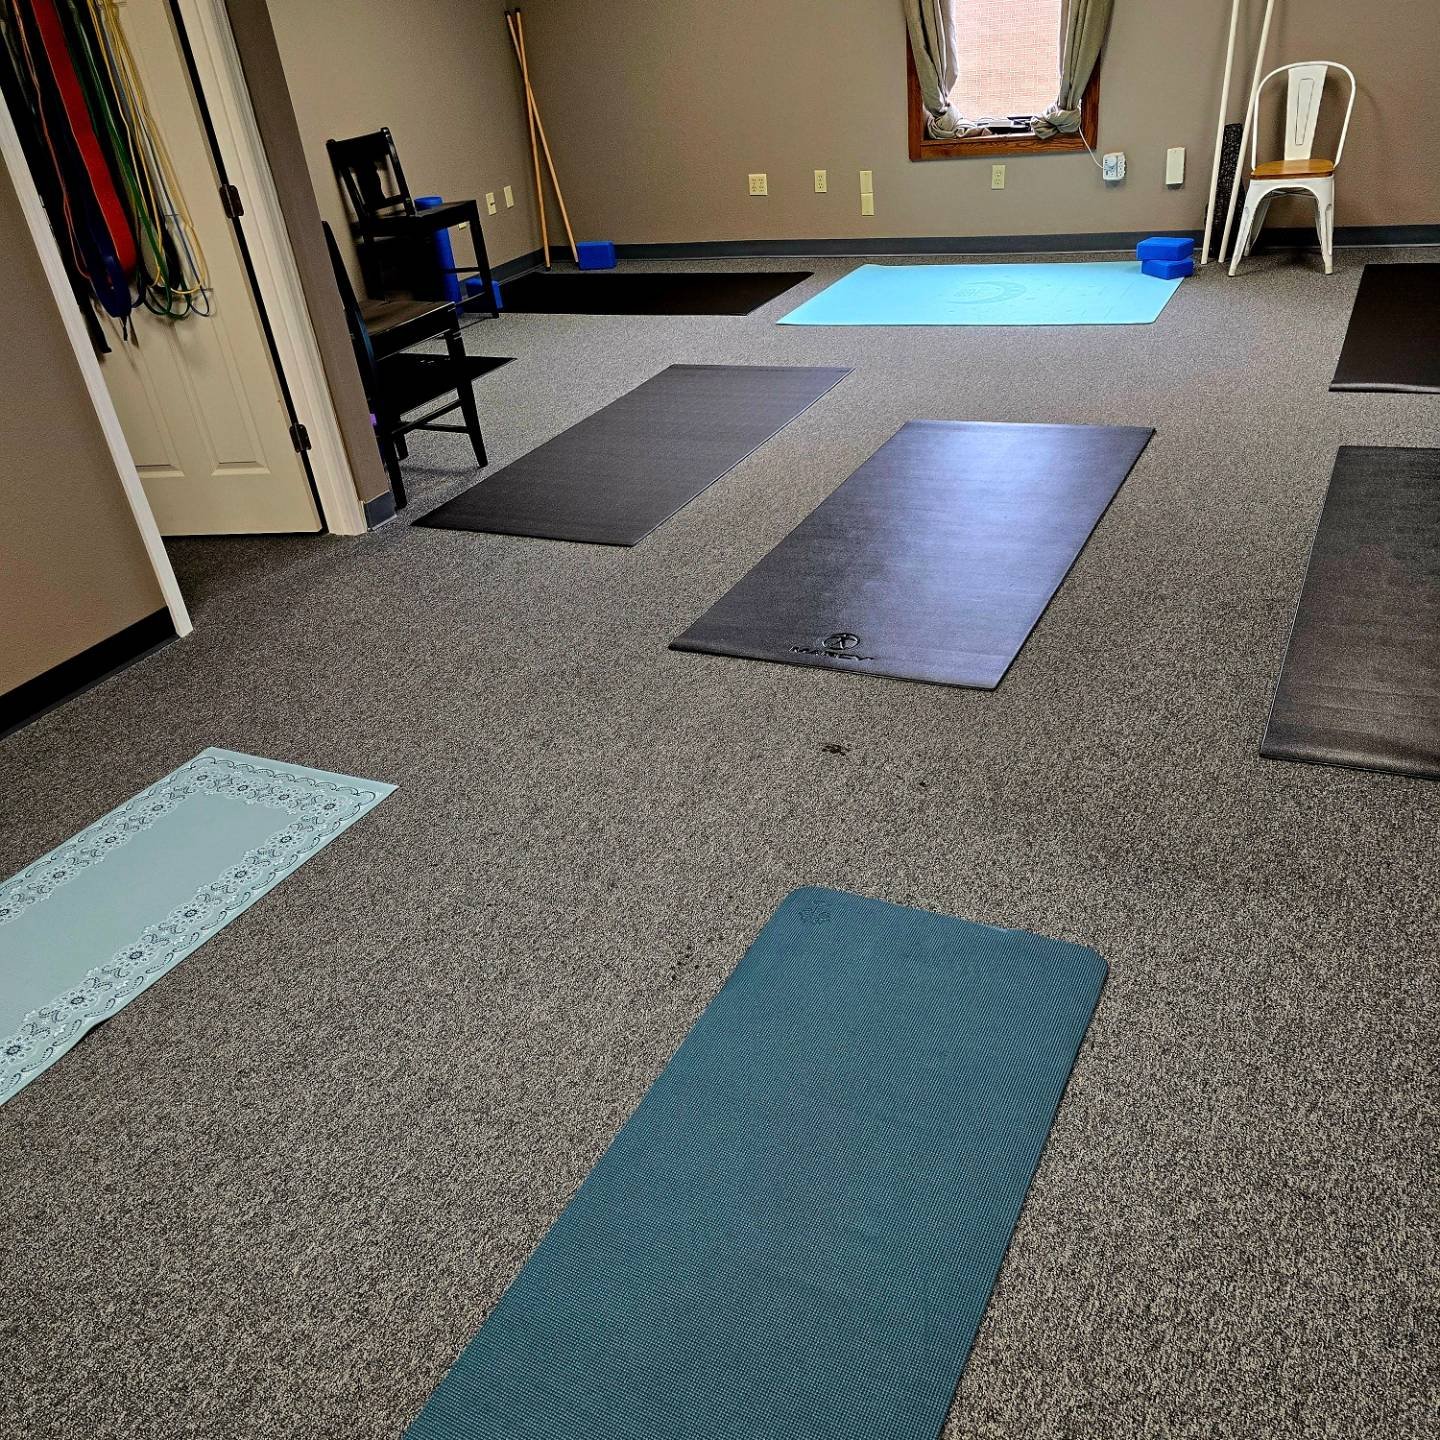 I've expanded my mobility training room and can now accommodate 3 more individuals for the 12:15 p.m. class!

If you suffer from stiff joints or limited mobility, consider trying Kinstretch class. Classes are held weekly on Tuesday, Wednesday, and Th